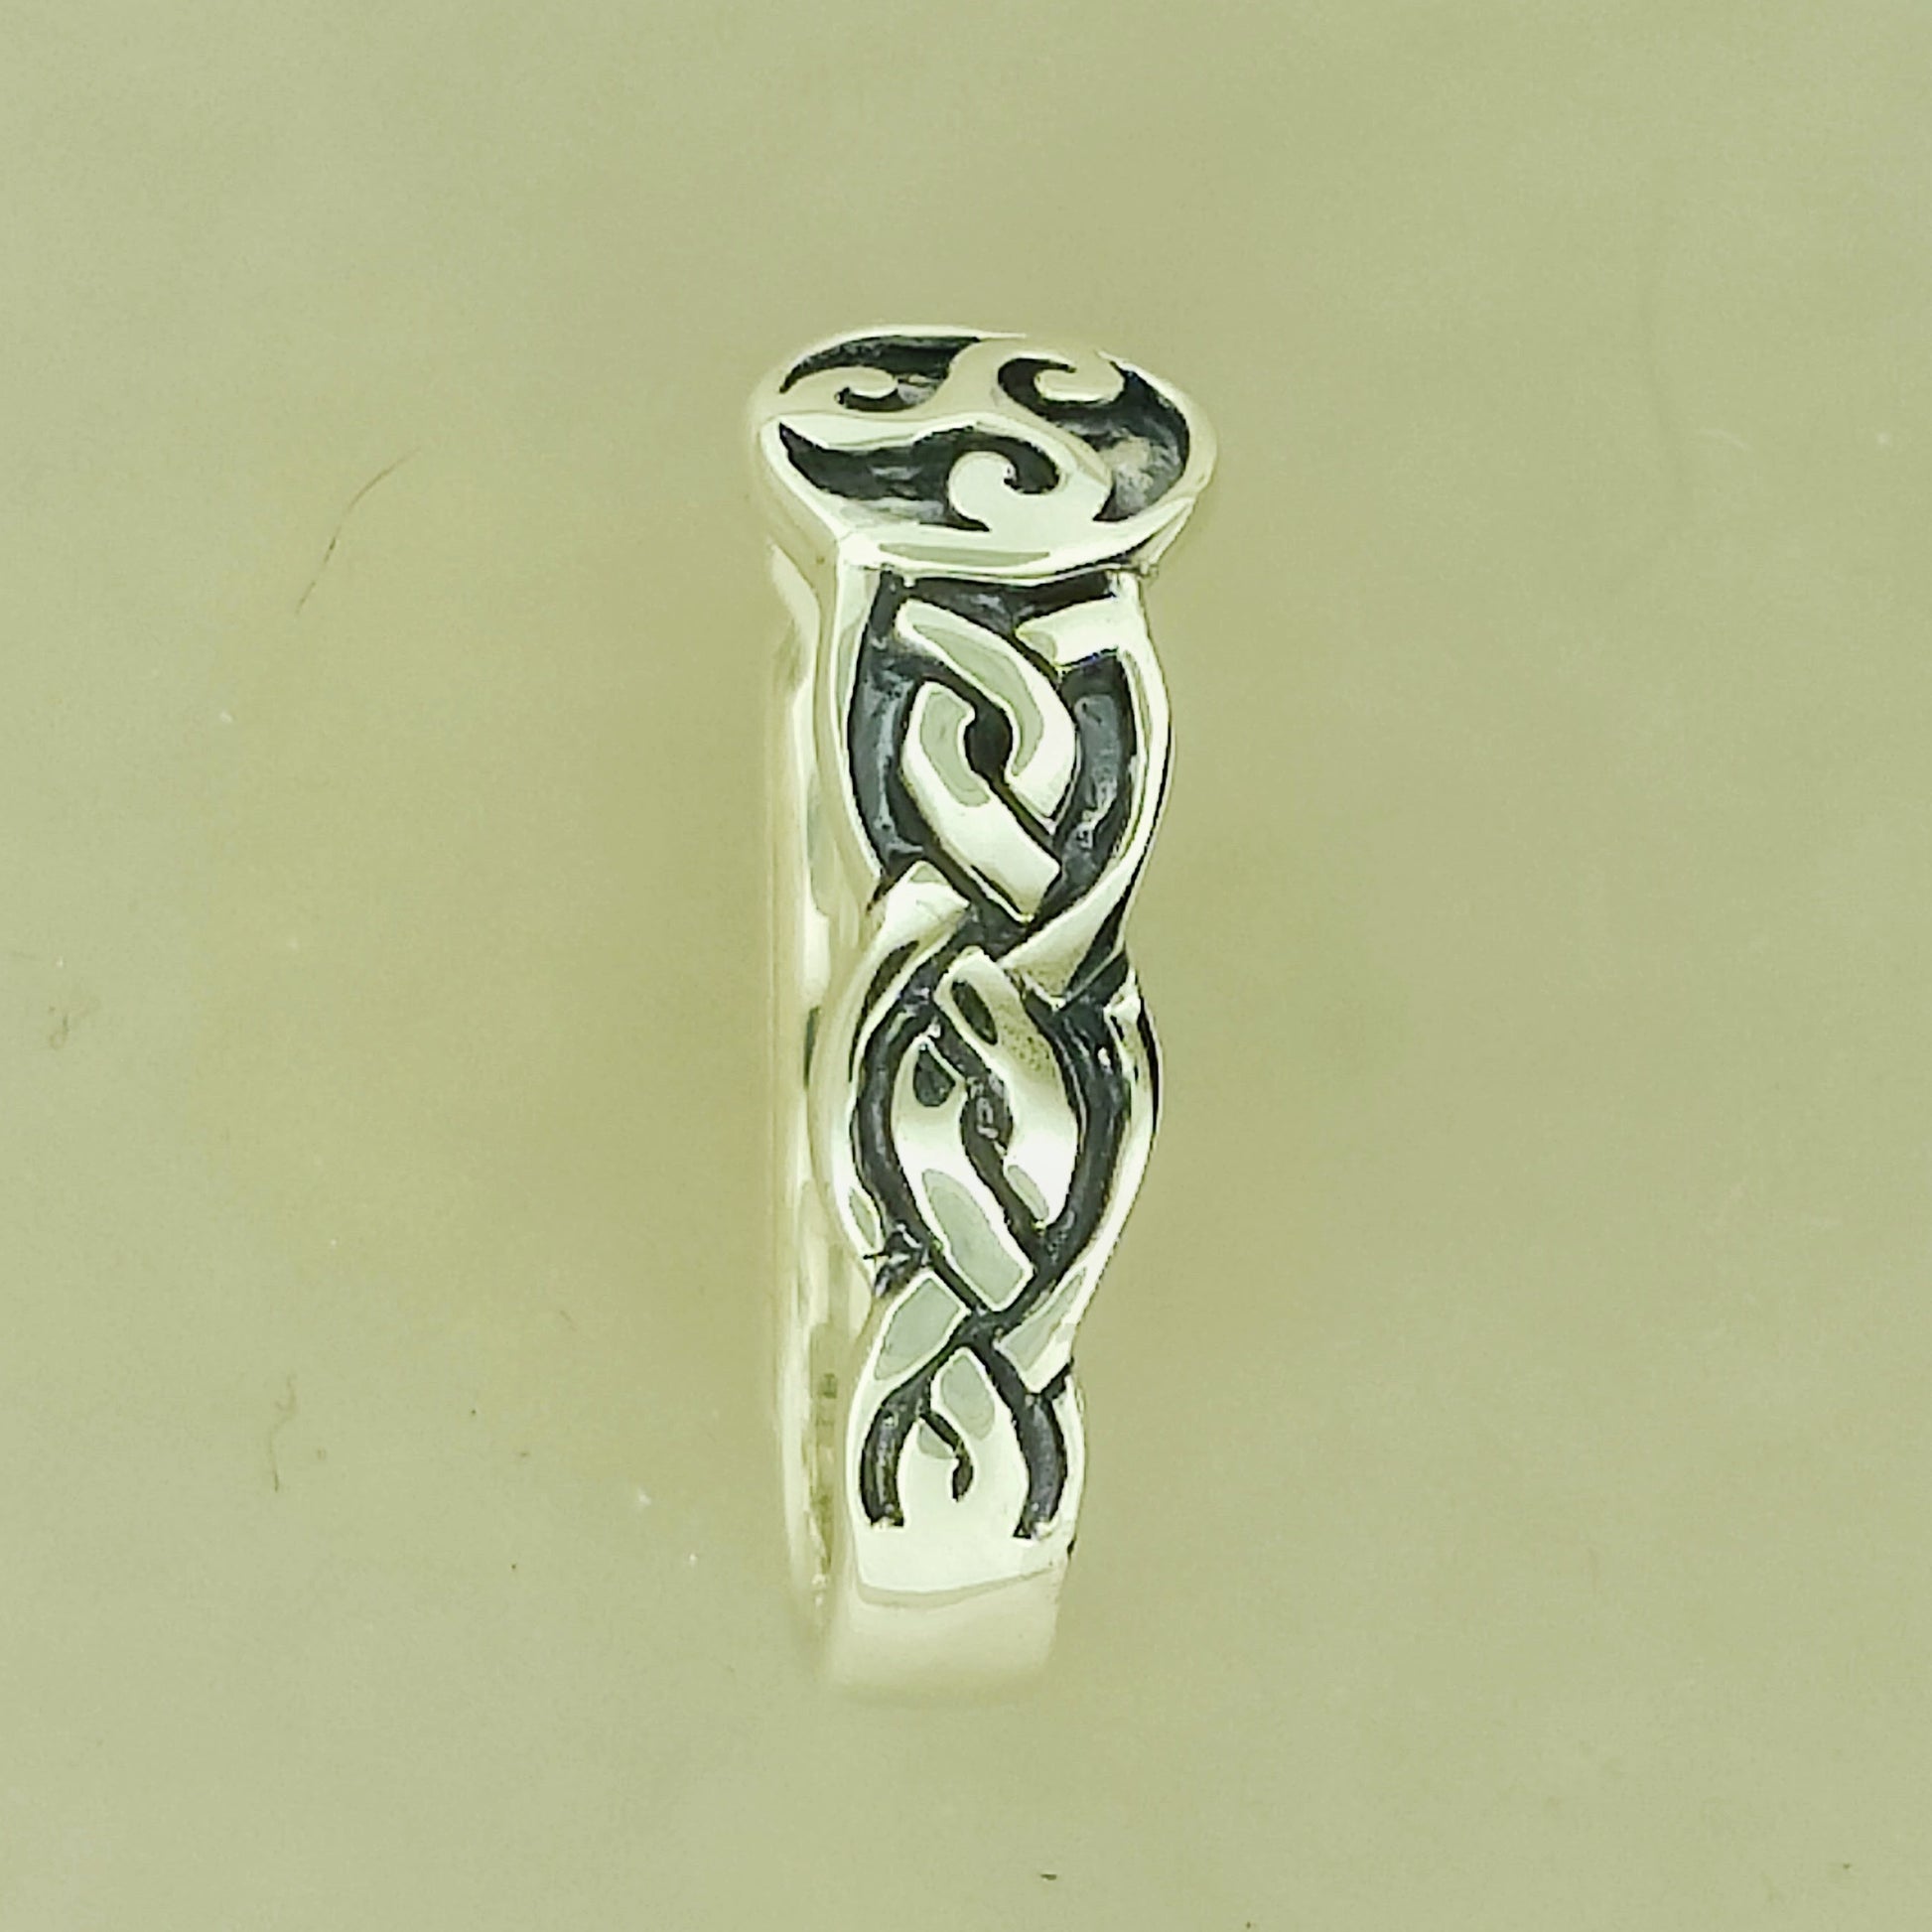 Triskele Knotwork Ring in Sterling Silver or Antique Bronze, Celtic Knot Ring, Custom Irish Celtic Engagement Ring, Irish Knot Ring, Silver Celtic Ring, Silver Irish Celtic Ring, Triskel Silver Ring, Celtic Knot Silver Ring, Triskelion Silver Ring